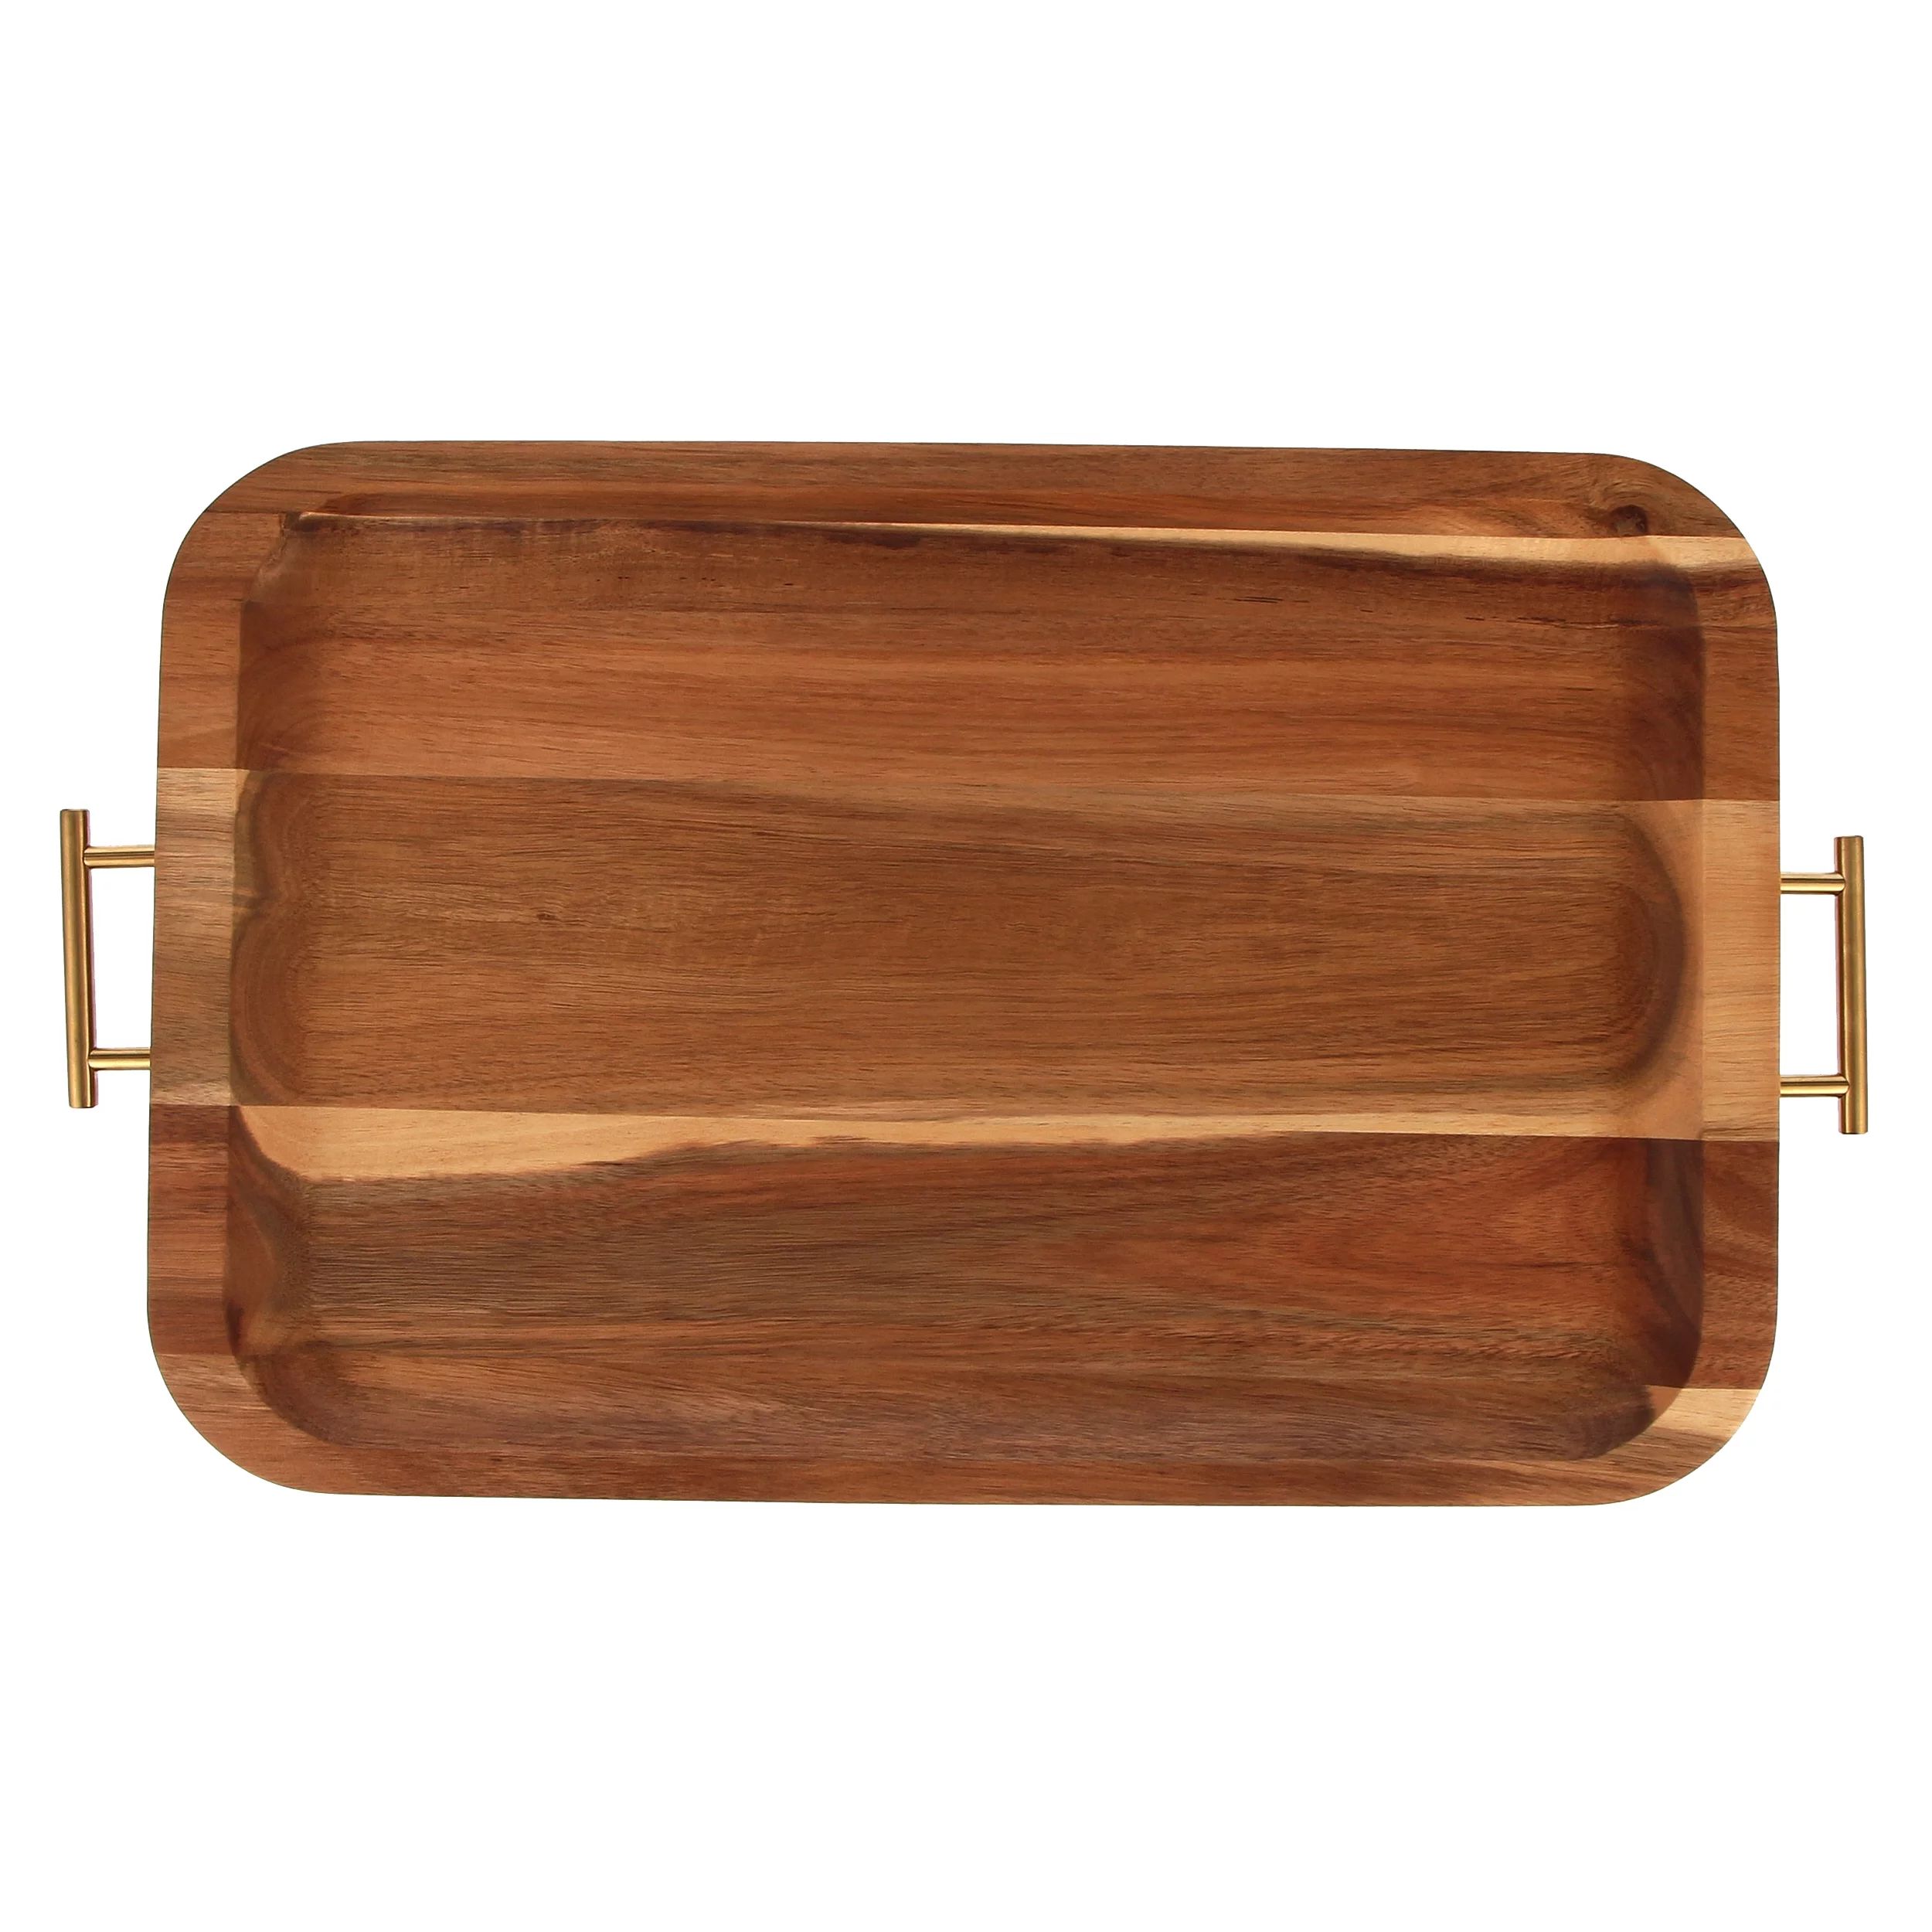 Better Homes & Gardens- Acacia Wood Rectangle Serving Tray with Gold Handles | Walmart (US)